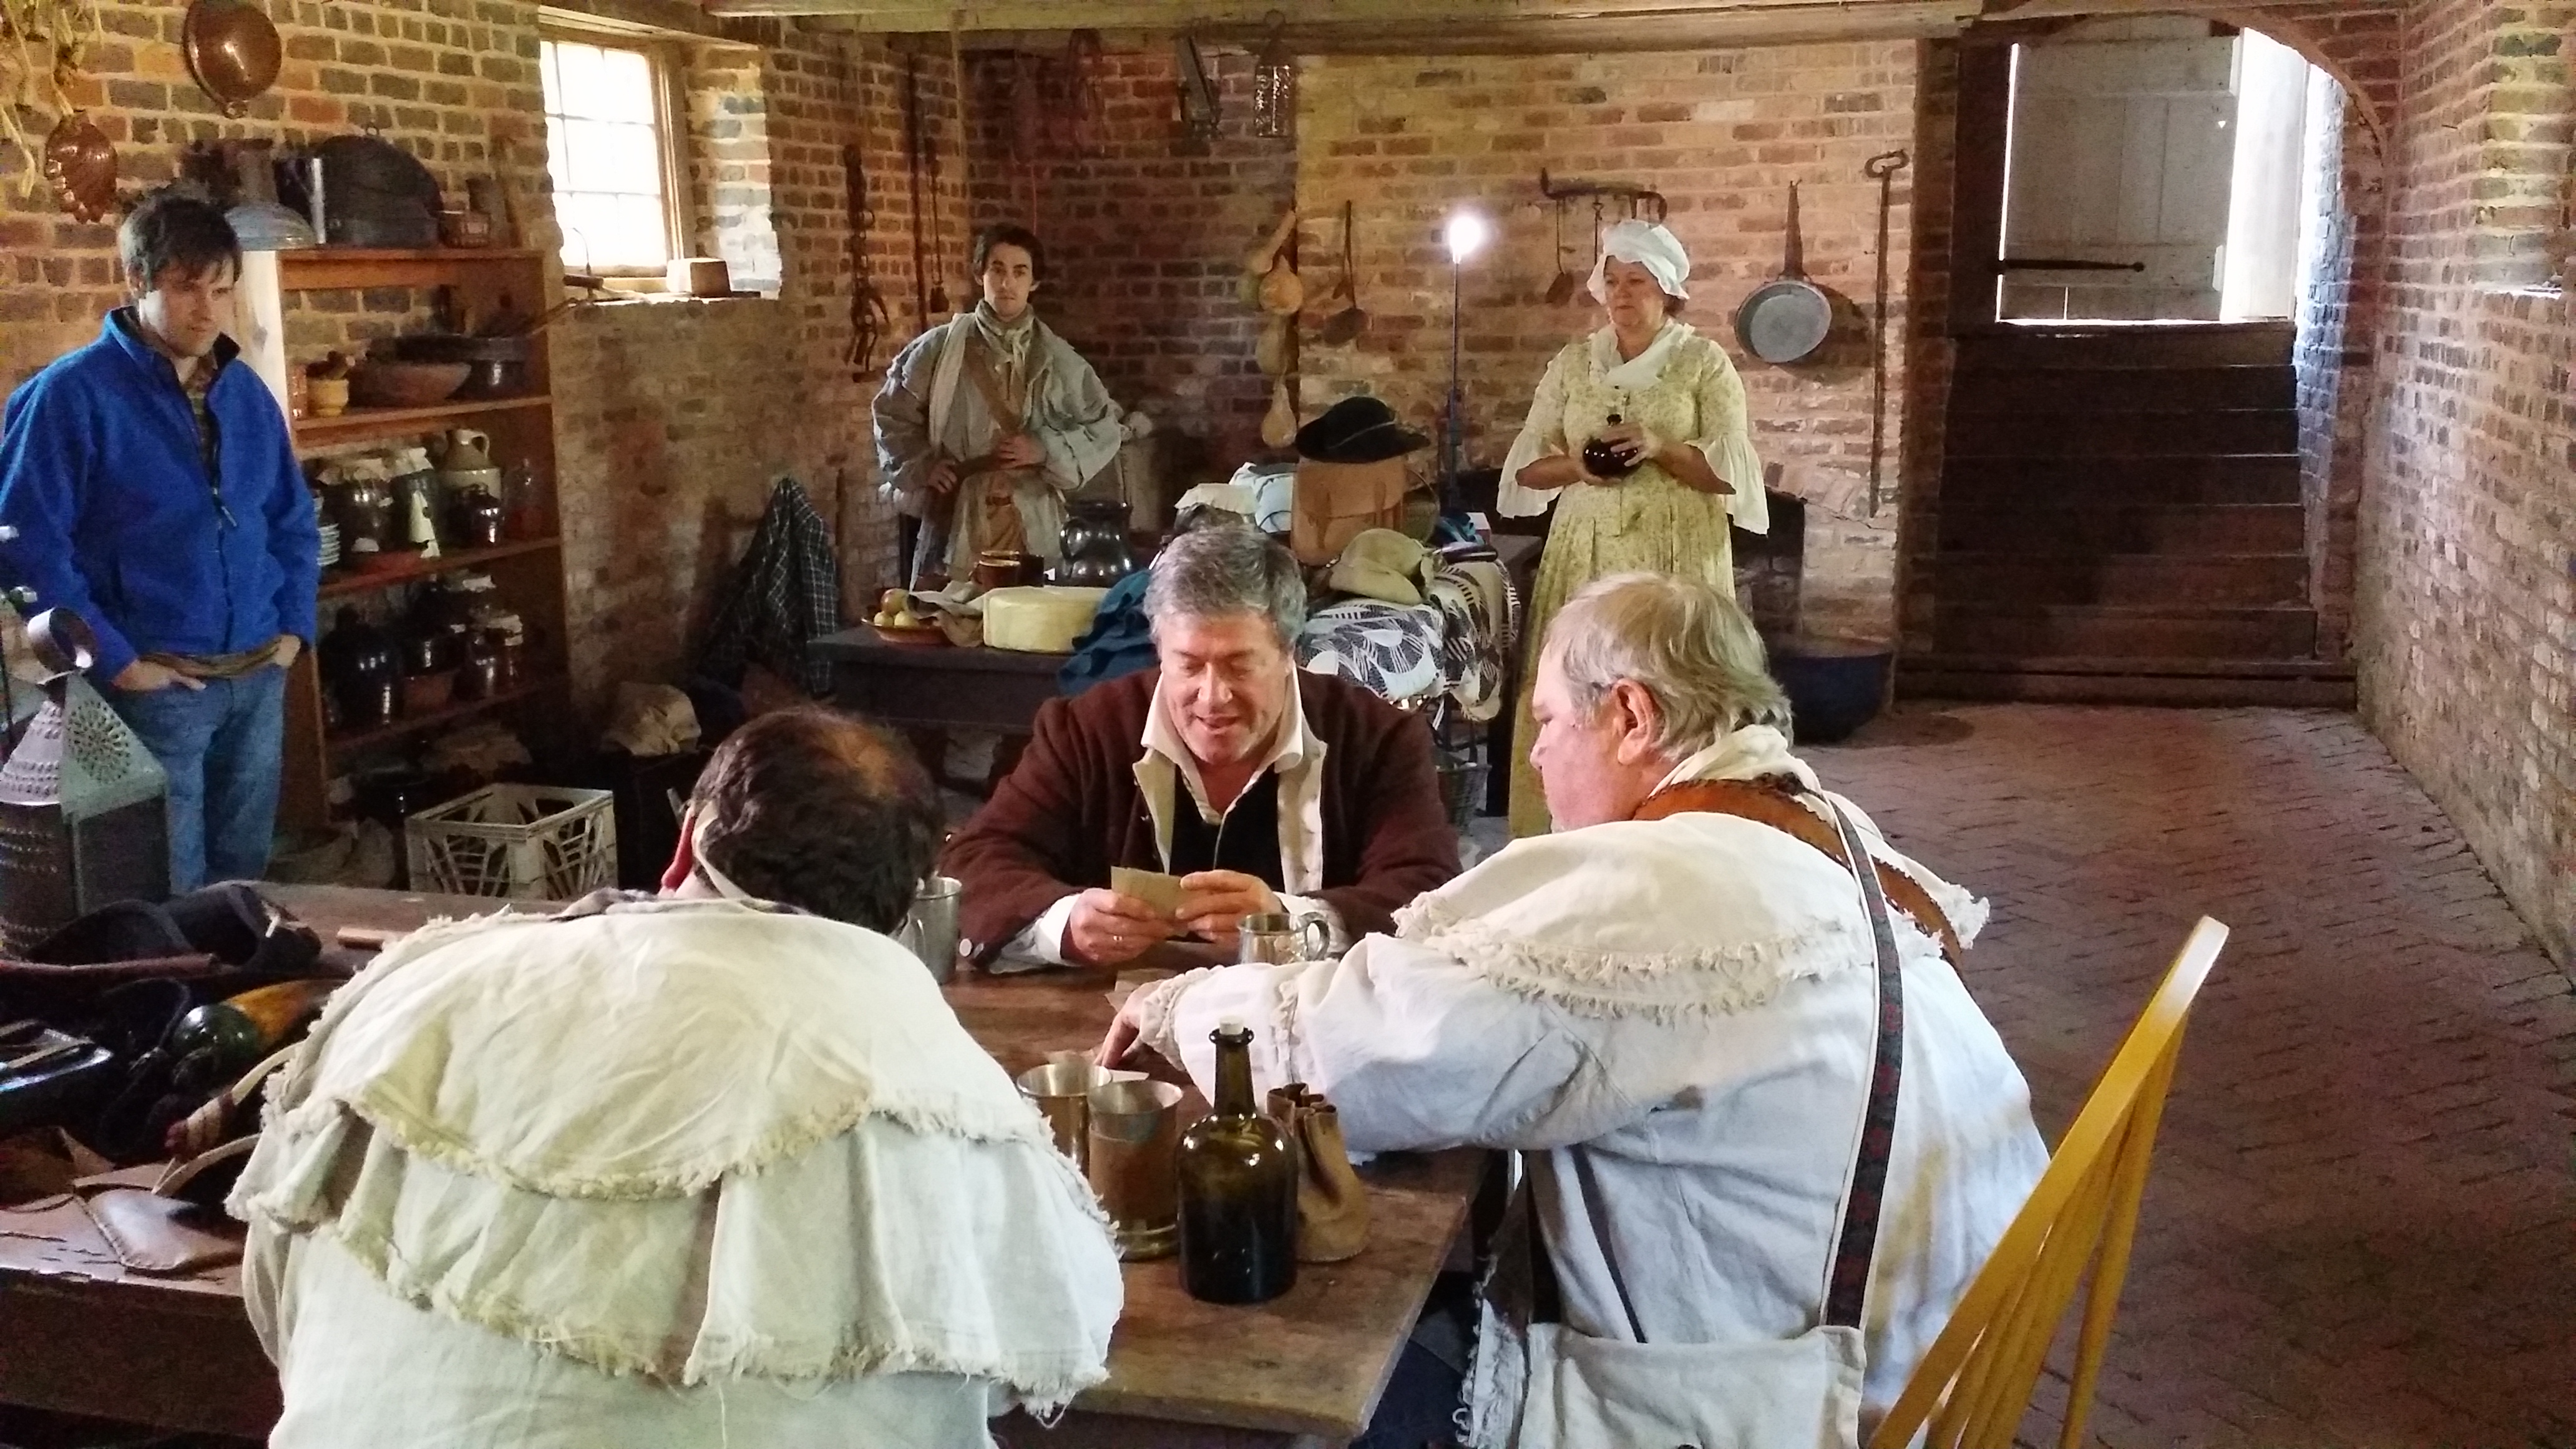 Rehearsing the tavern scene for CAMERON in the cellar where a scene from THE PATRIOT was filmed.